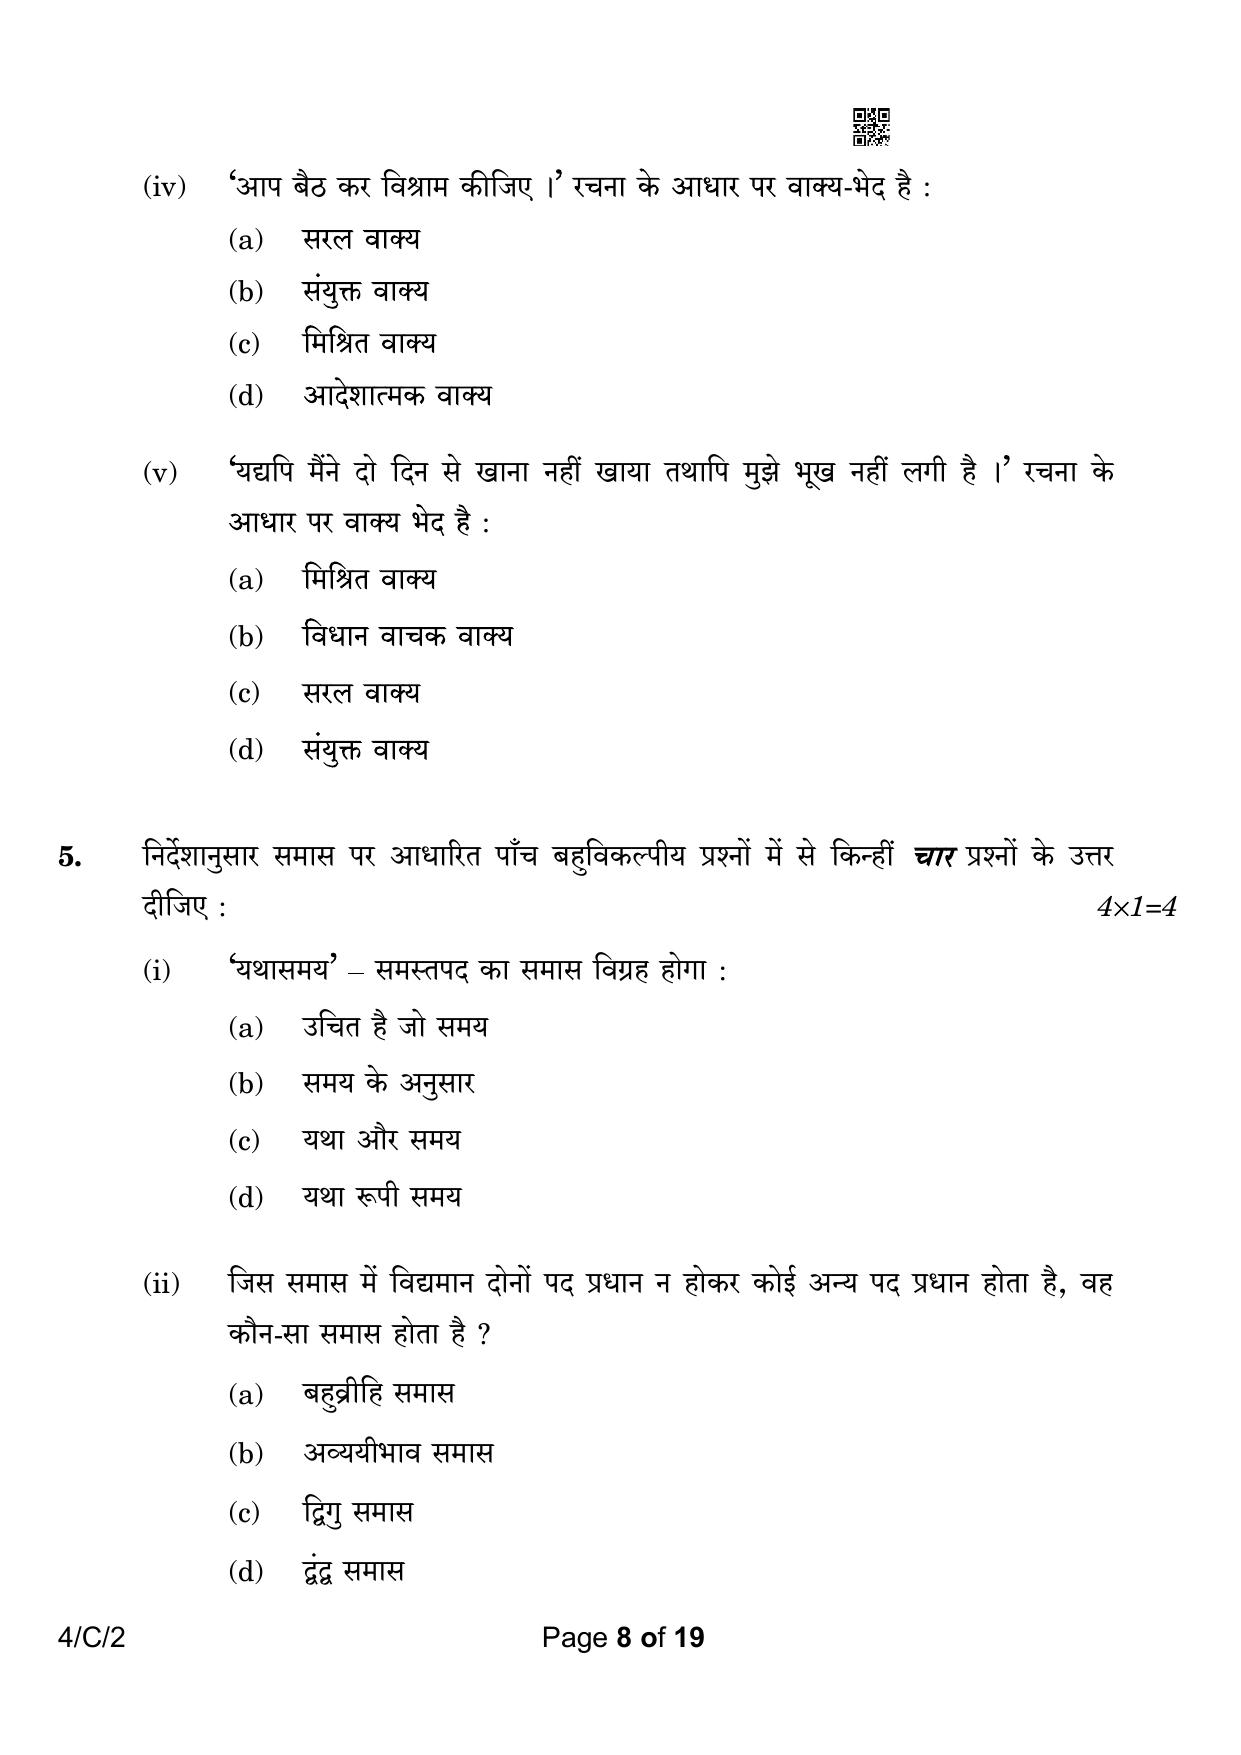 CBSE Class 10 4-2 Hindi B 2023 (Compartment) Question Paper - Page 8